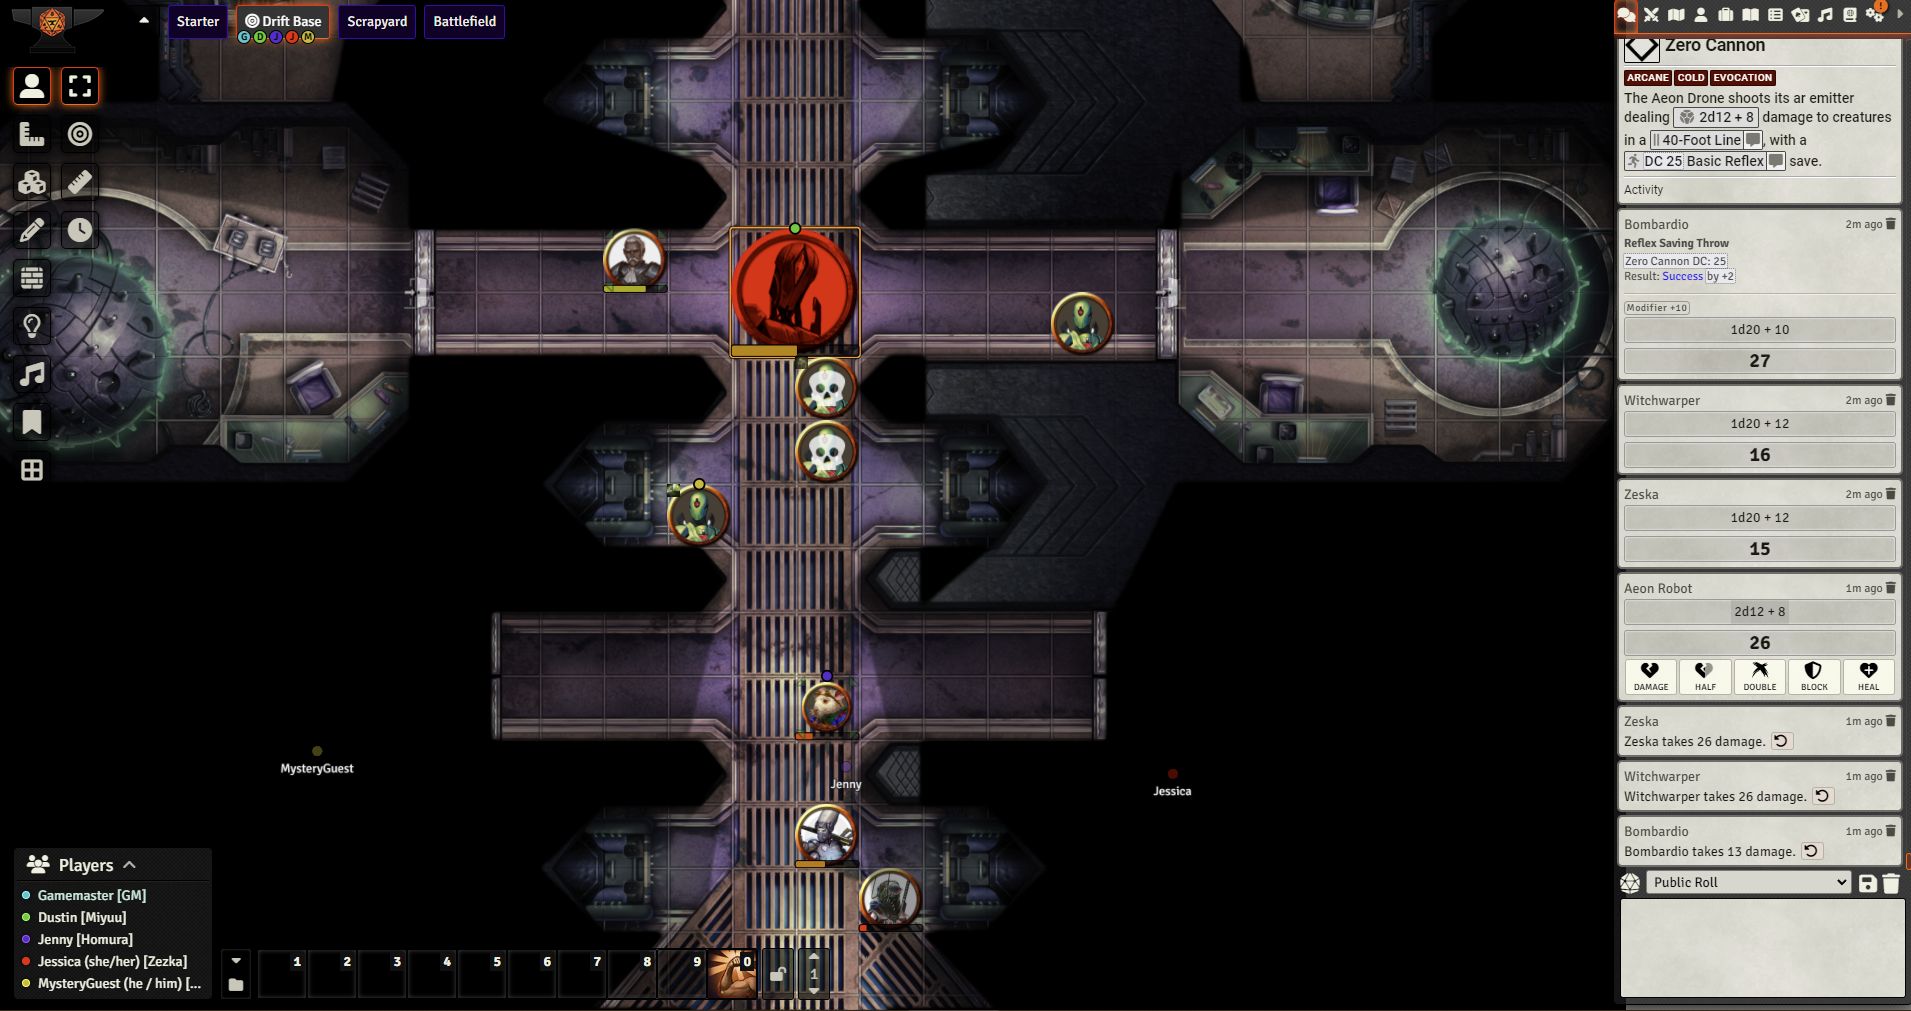 Top down view of virtual tabletop online map featuring an interior walkway with the game UI on the right side of the screen